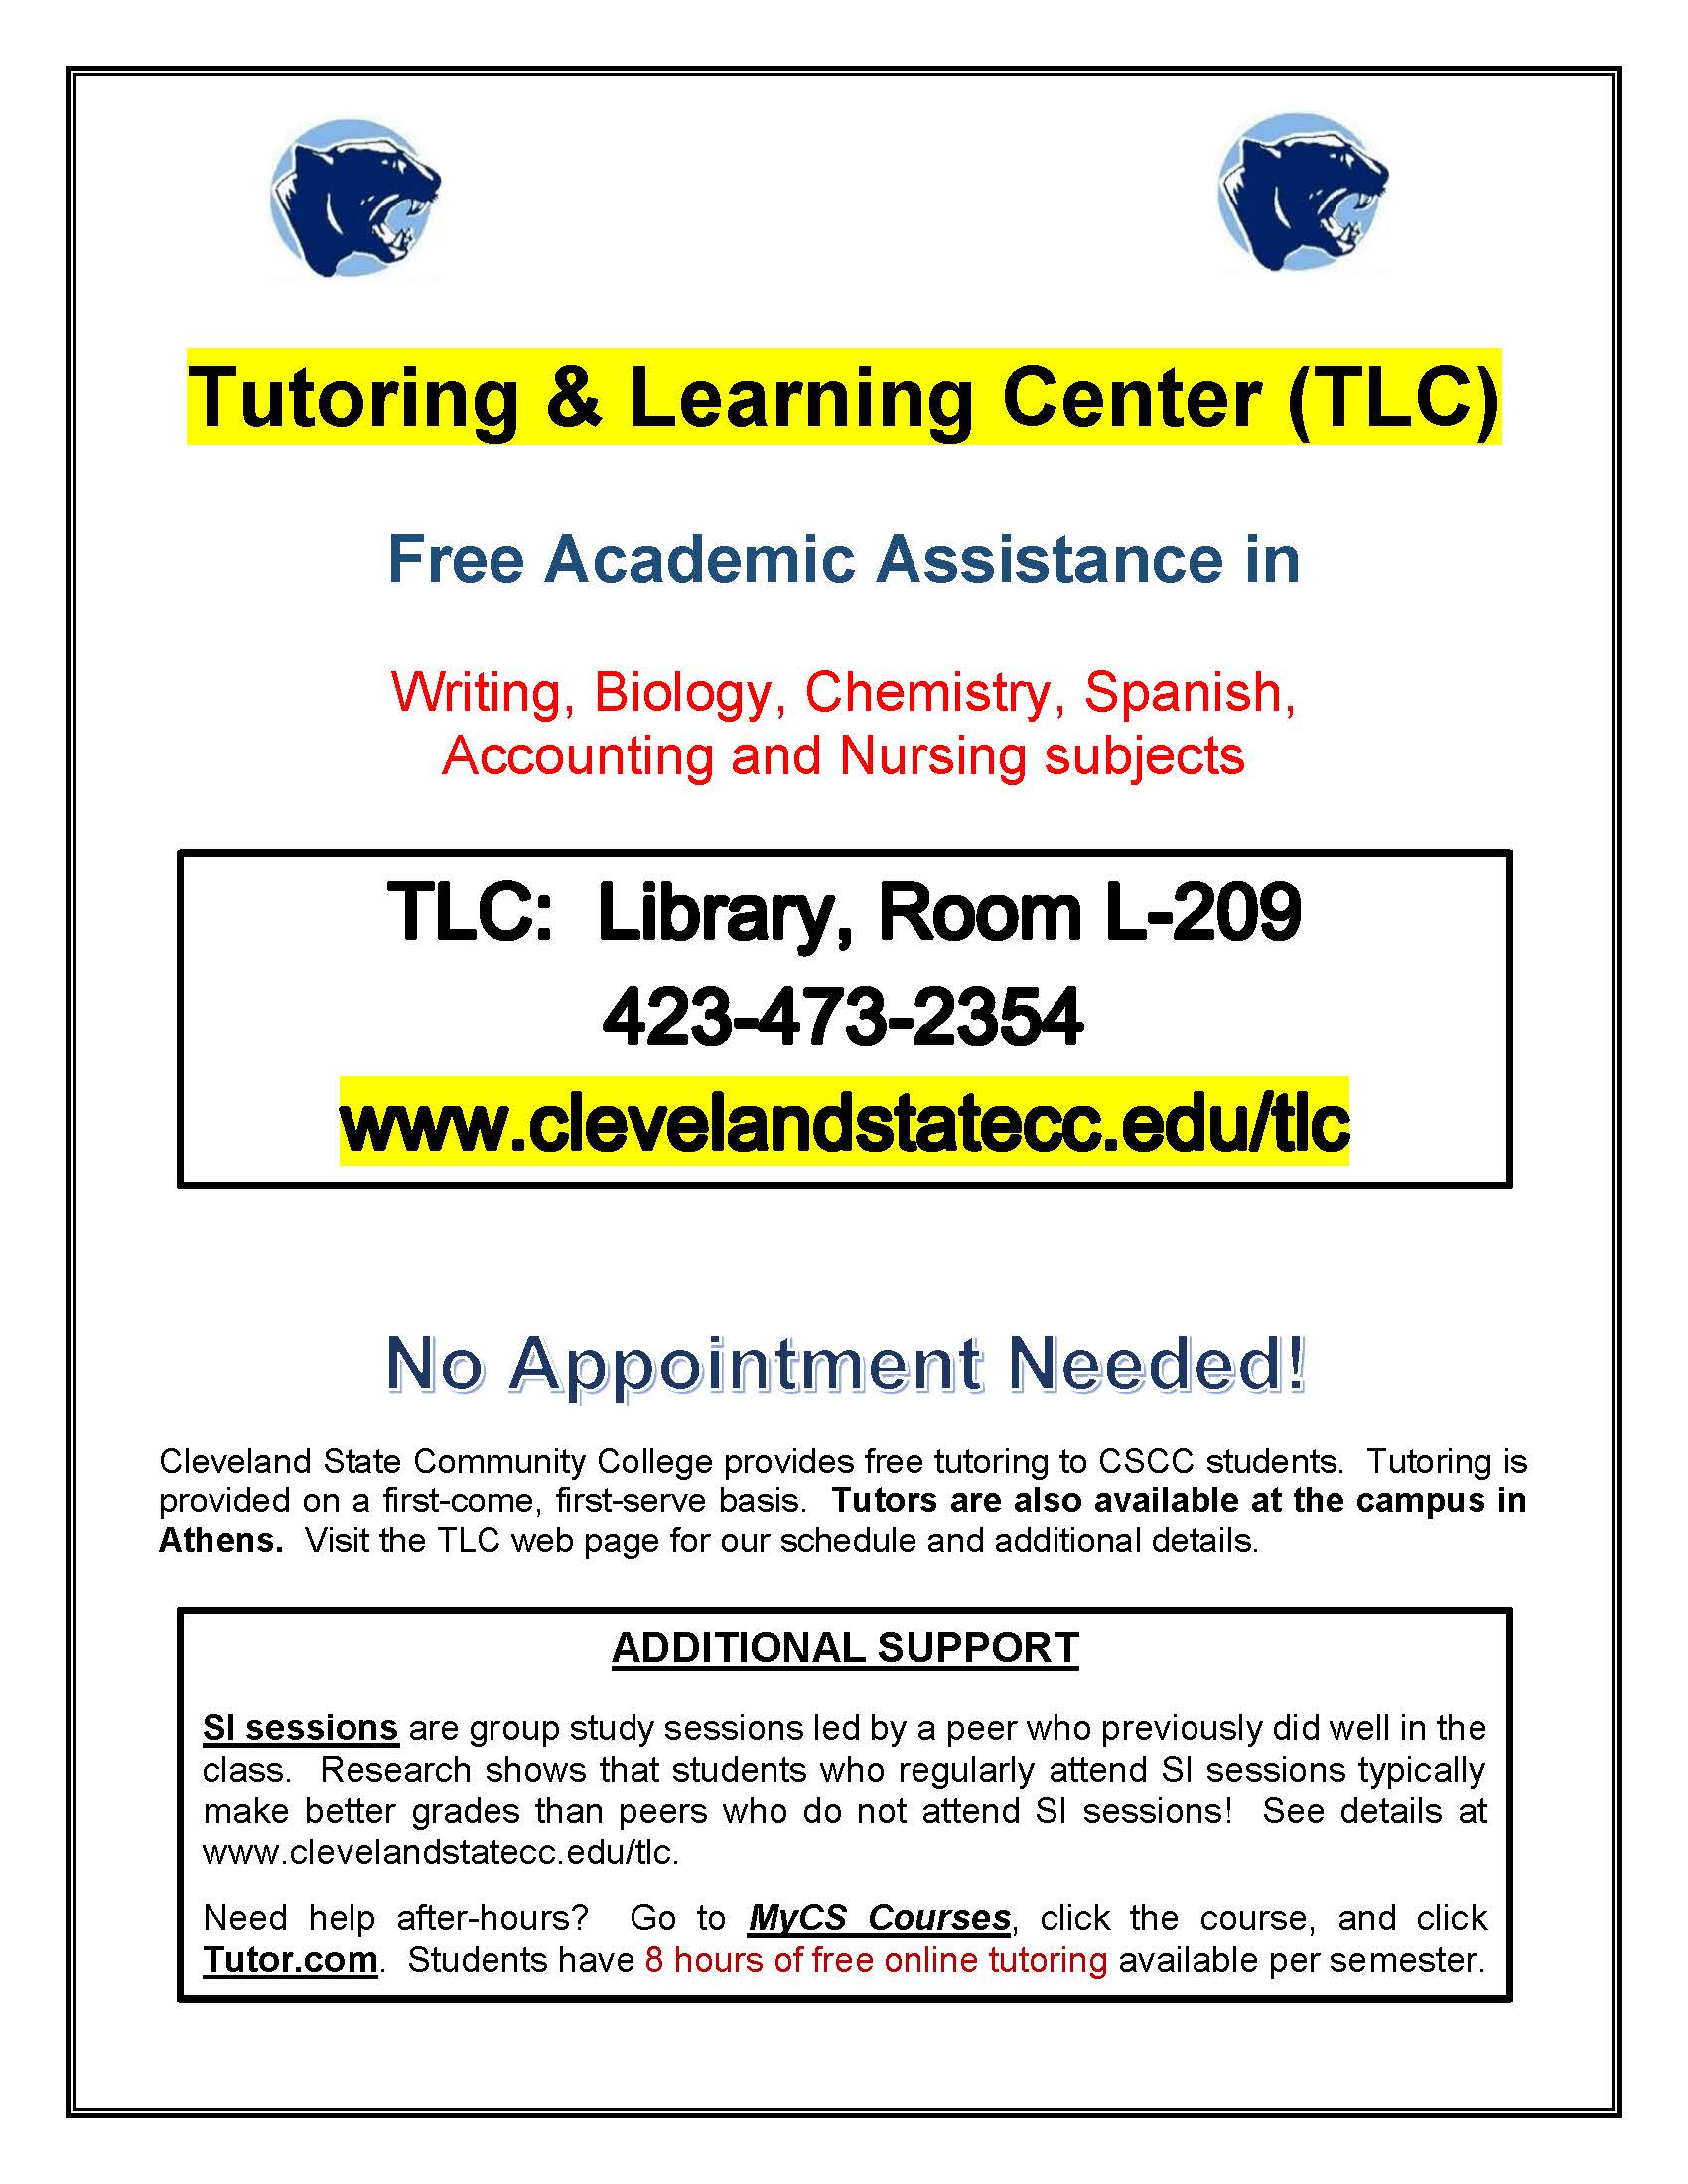 Tutoring and Learning Center flier. PDF available at link above.